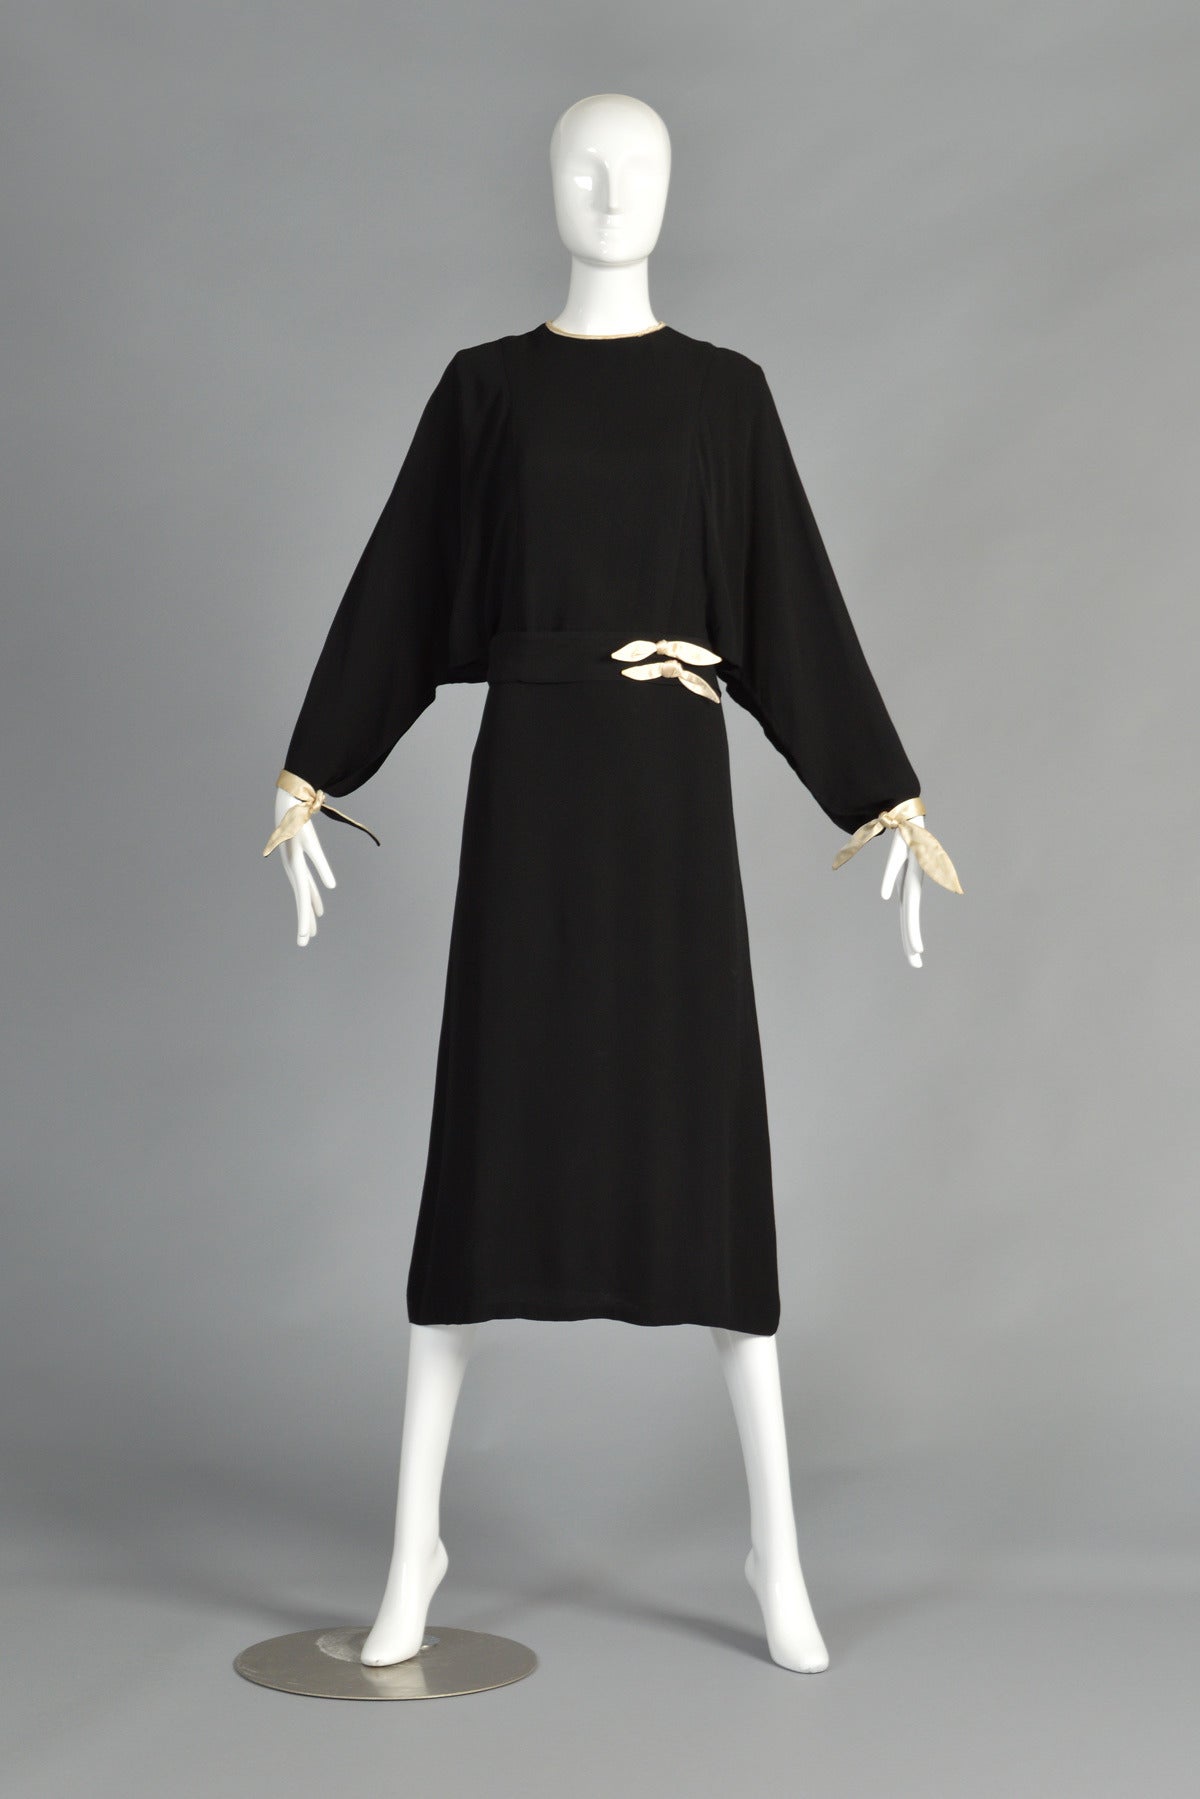 Lovely 1930s black crepe dress with the simplest and most elegant details. Classic high neck construction with nipped waist and draped sleeves that are open on the underside of each. Ivory silk satin ties at each wrist are the only things holding